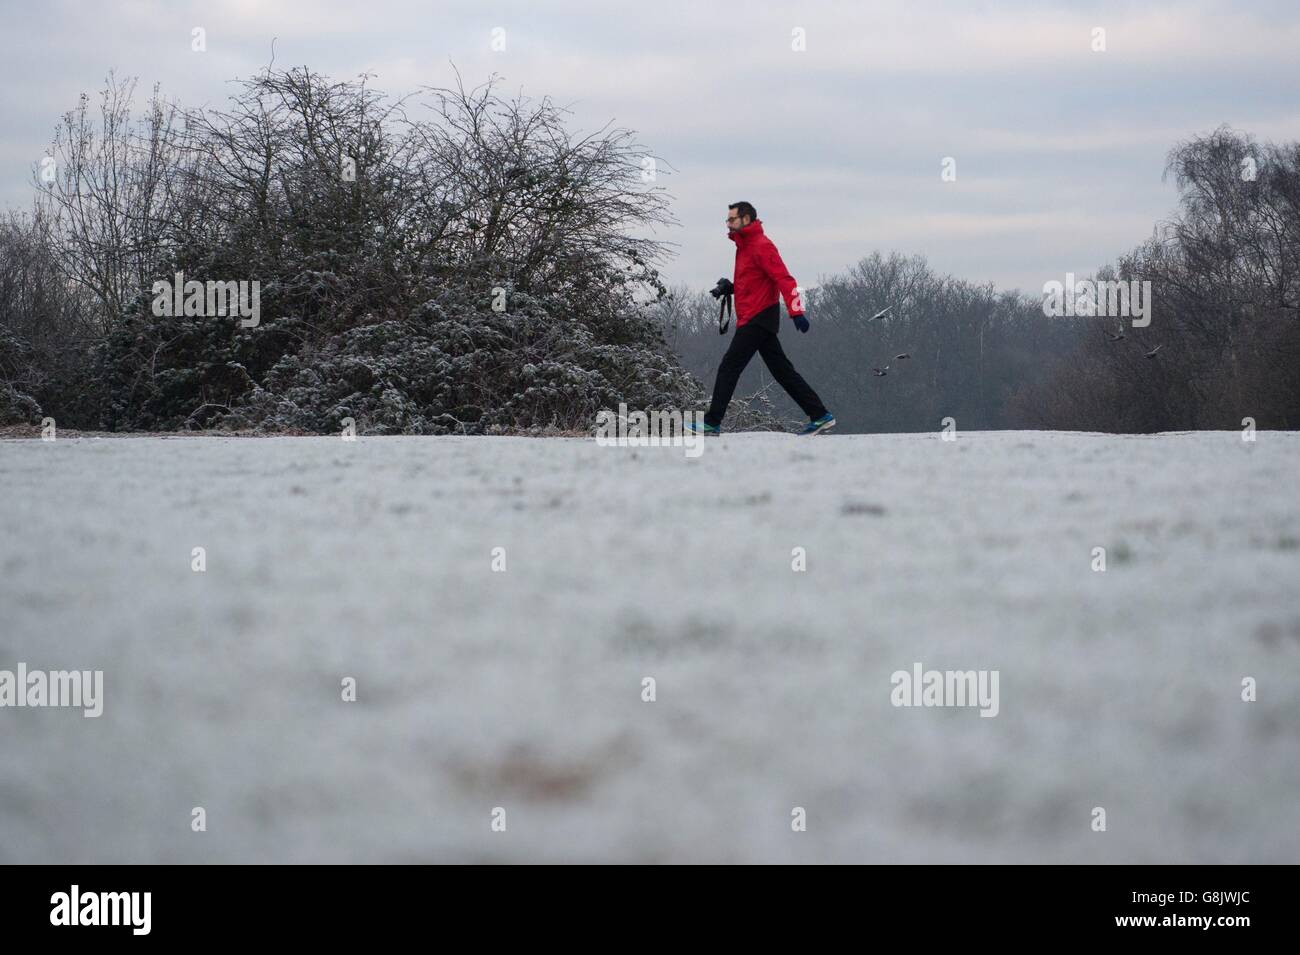 A photographer in Epping Forest, north east London, as Britain awoke to another icy start with a risk of fog affecting the morning rush hour. Stock Photo